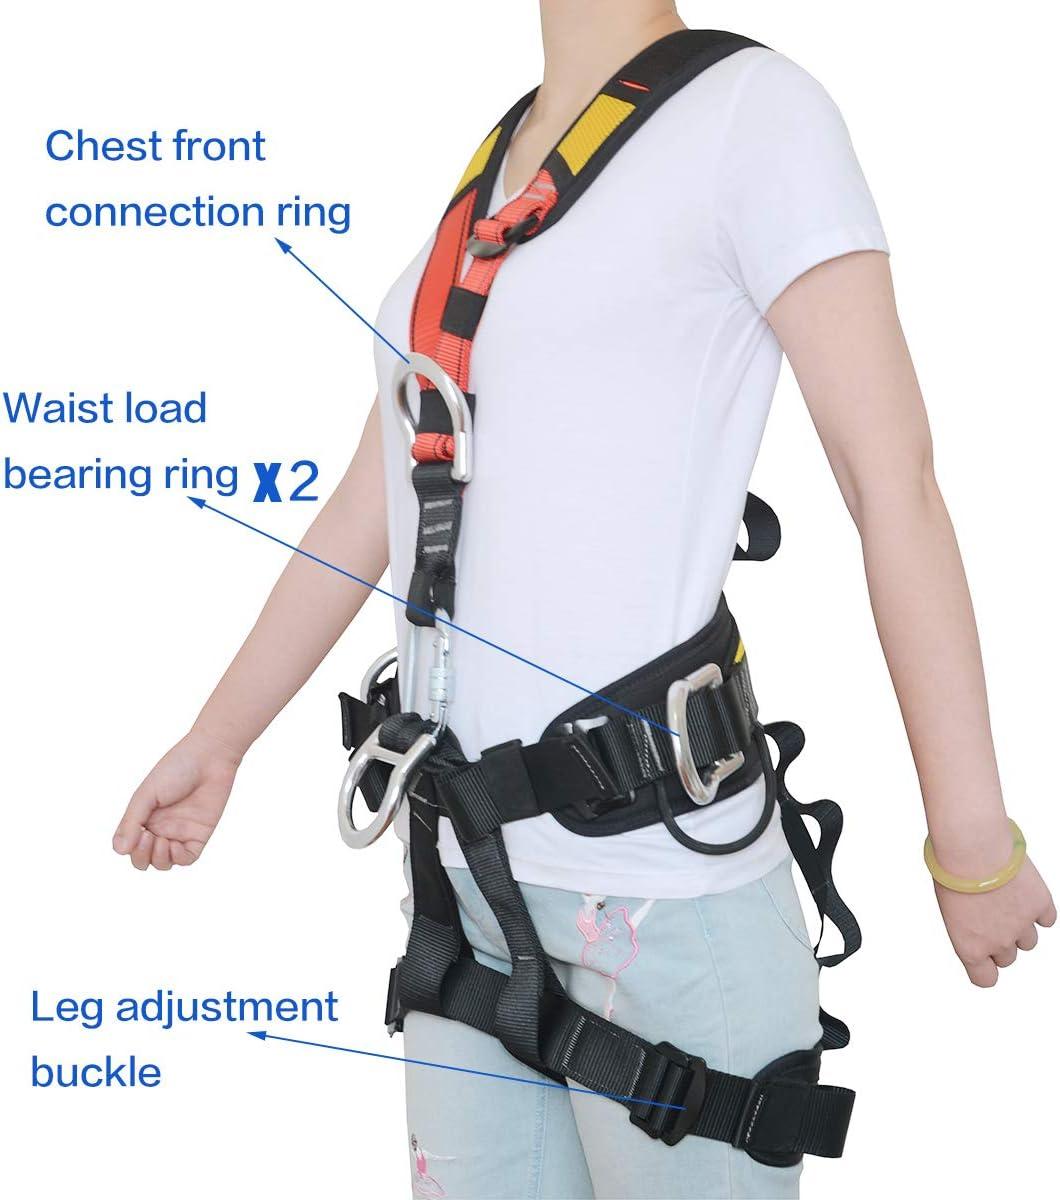 HeeJo Climbing, Safety Safe Seat Belt for Outdoor Tree Climbing